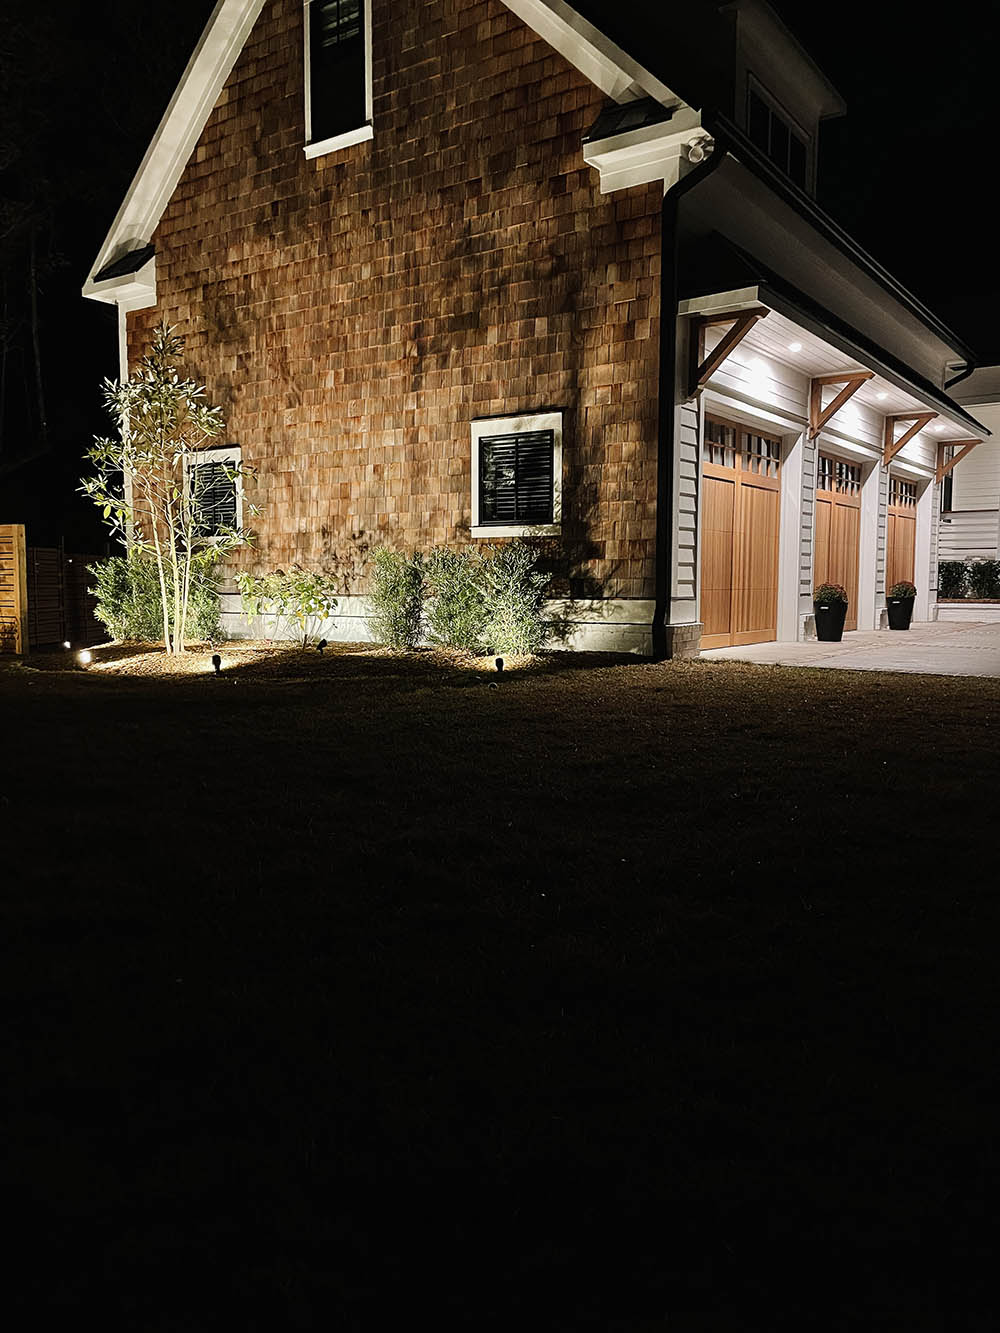 A house at night being lit by small outdoor lights.